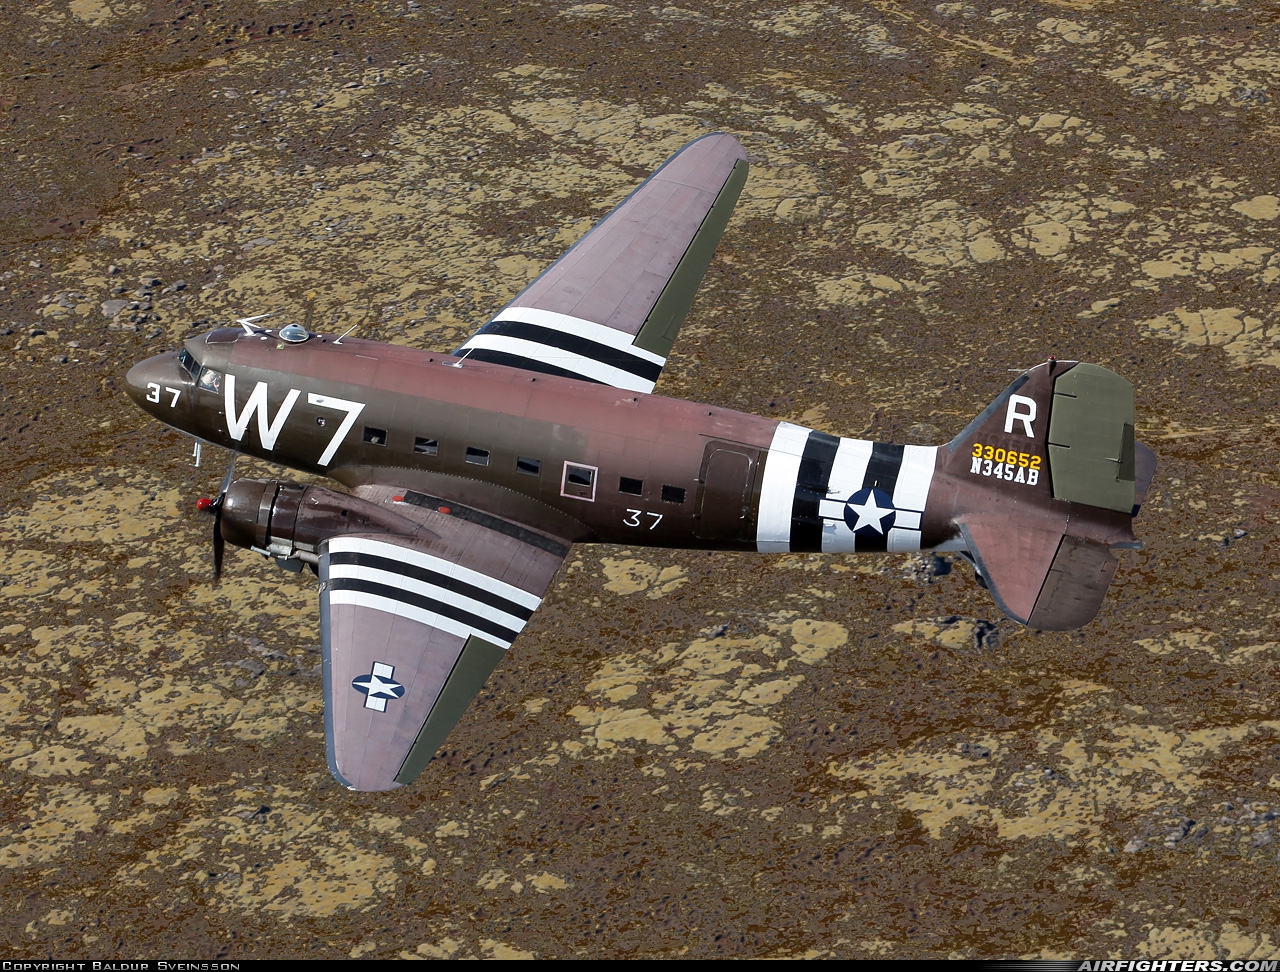 Private Douglas C-47A Skytrain N345AB at In Flight, Iceland